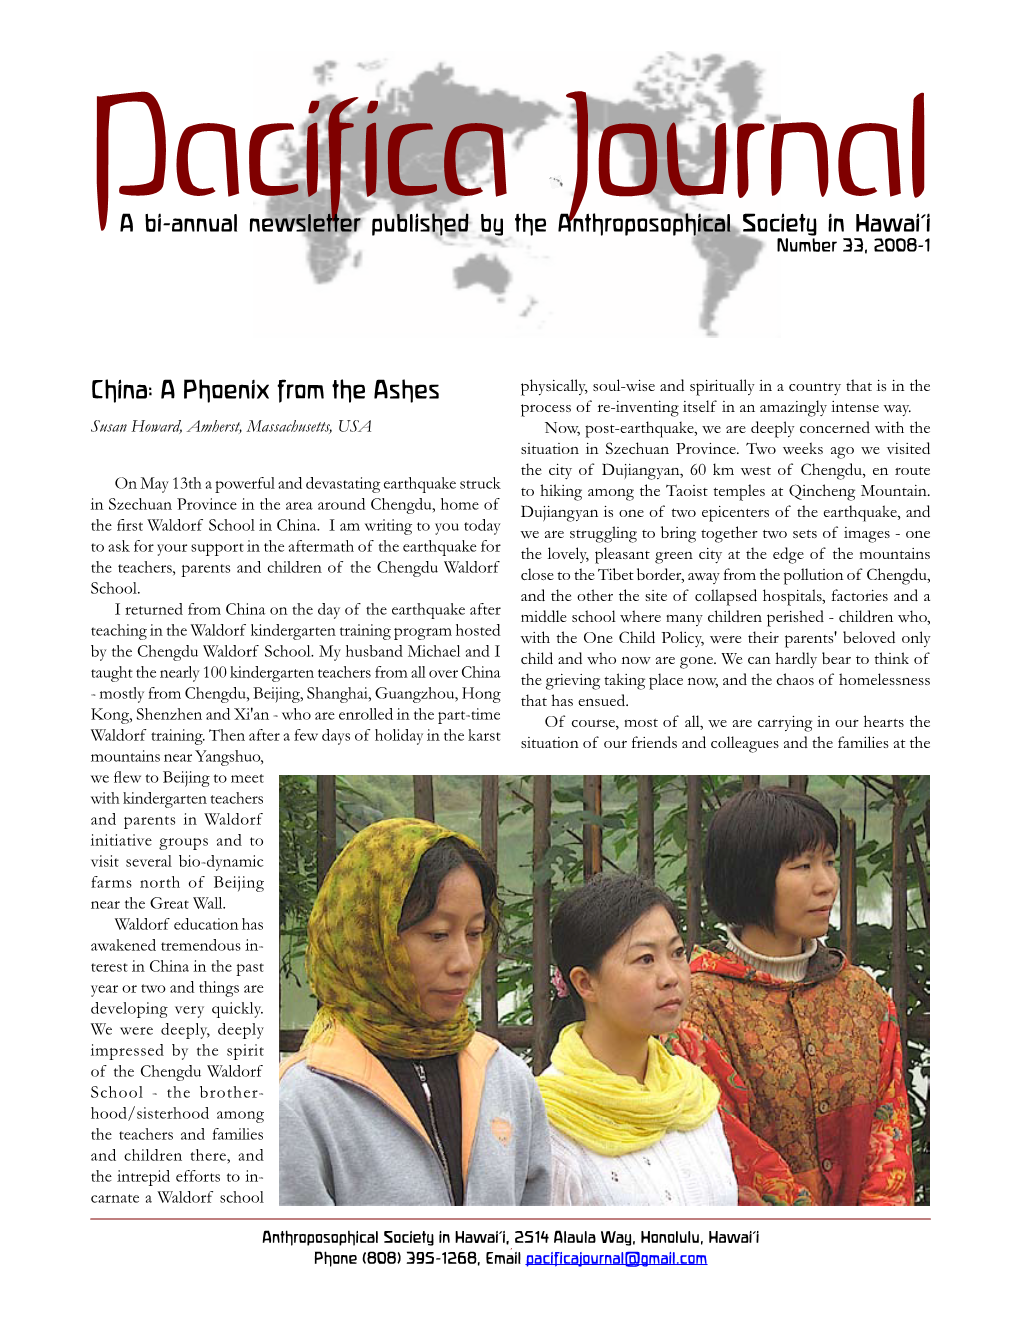 Pacifica Journal #33 2008(1)